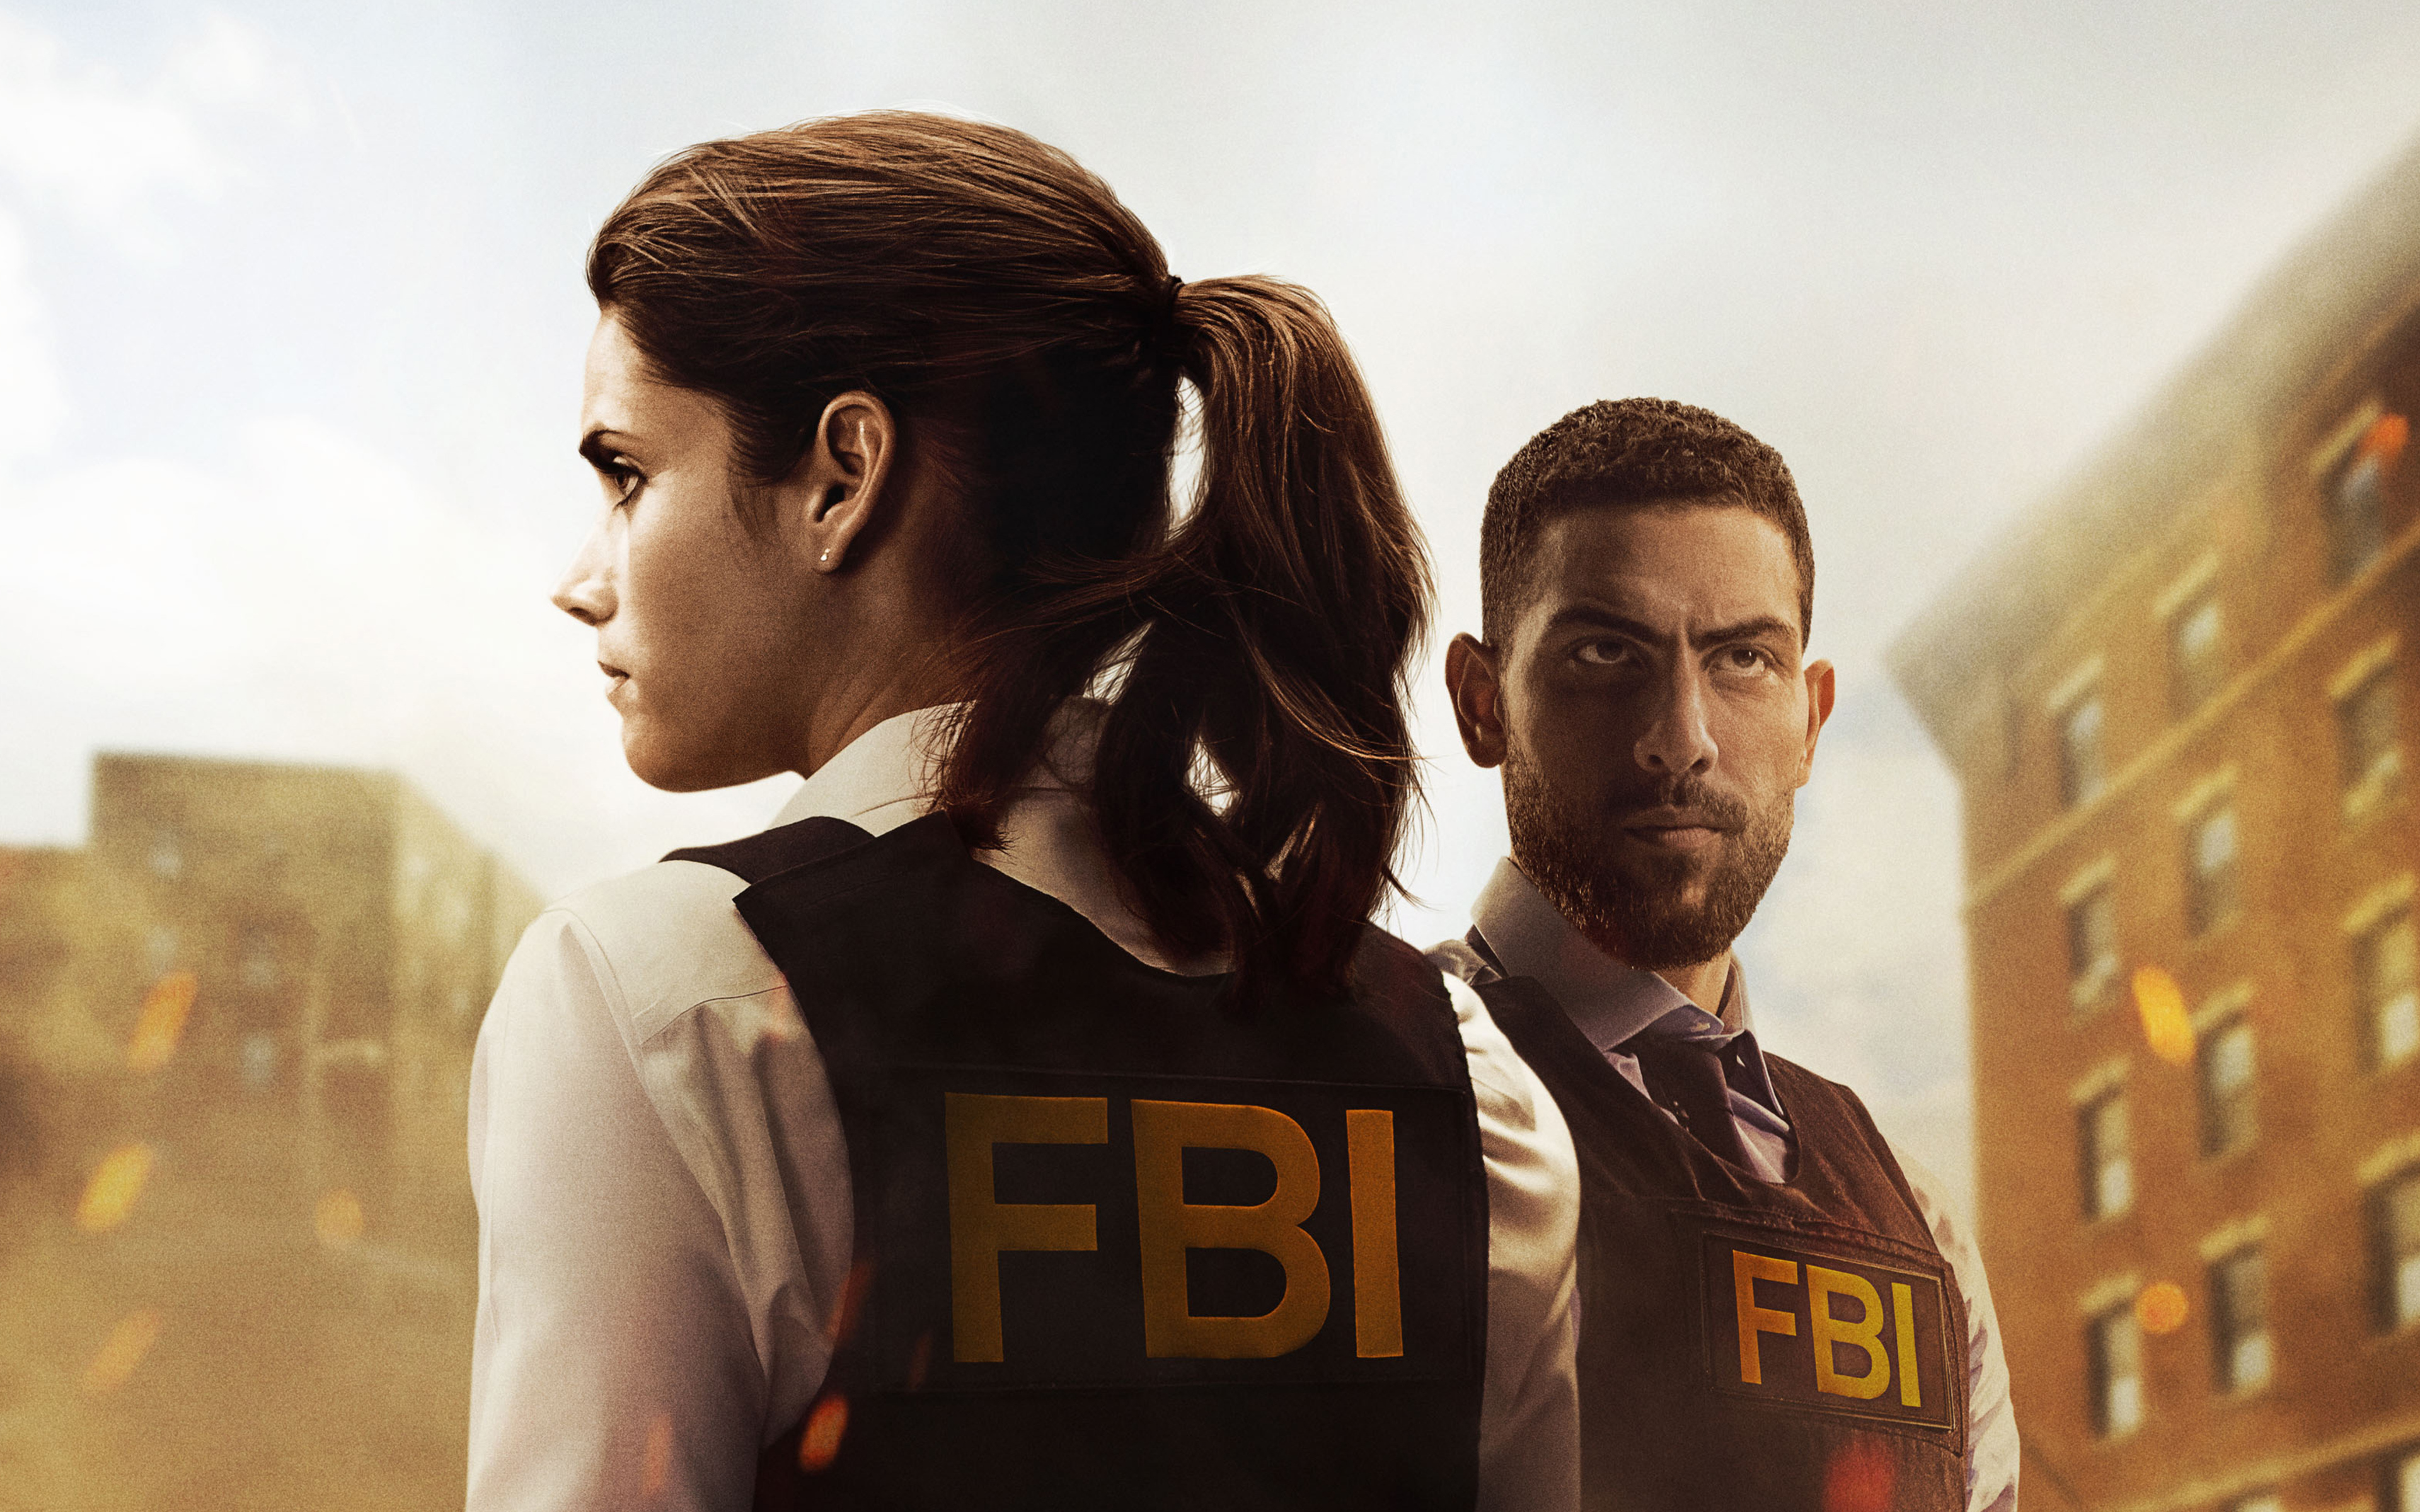 Download wallpaper FBI, 4k, Special Agent Maggie Bell, Special Agent Omar Adom, poster, 2018 movie, TV Series, Zeeko Zaki, Missy Peregrym for desktop with resolution 3840x2400. High Quality HD picture wallpaper